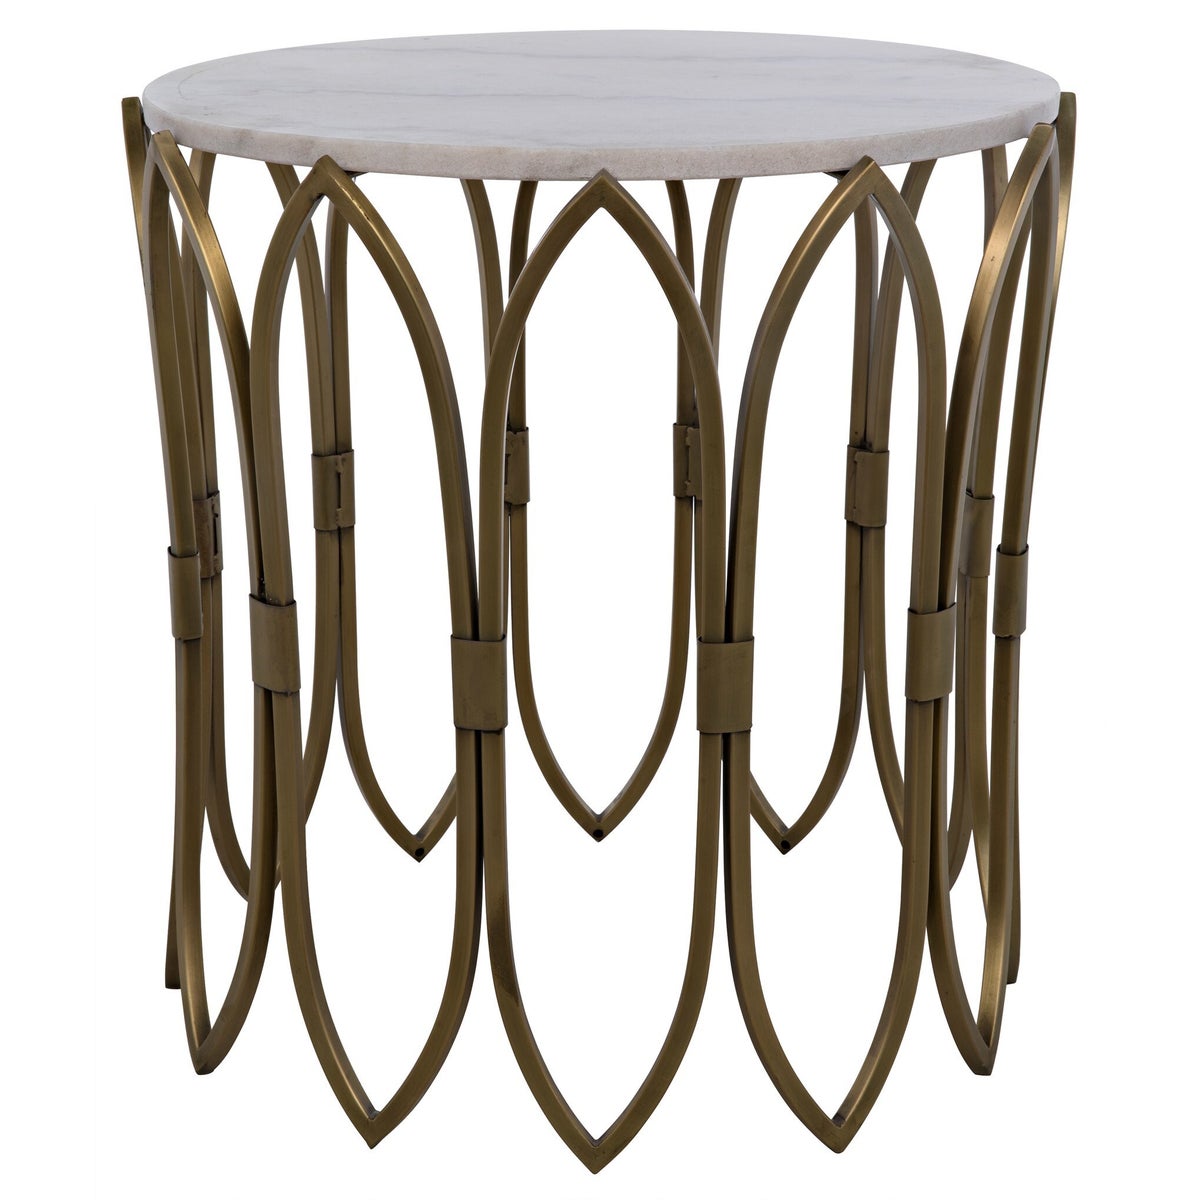 Nola Side Table, Steel with Brass